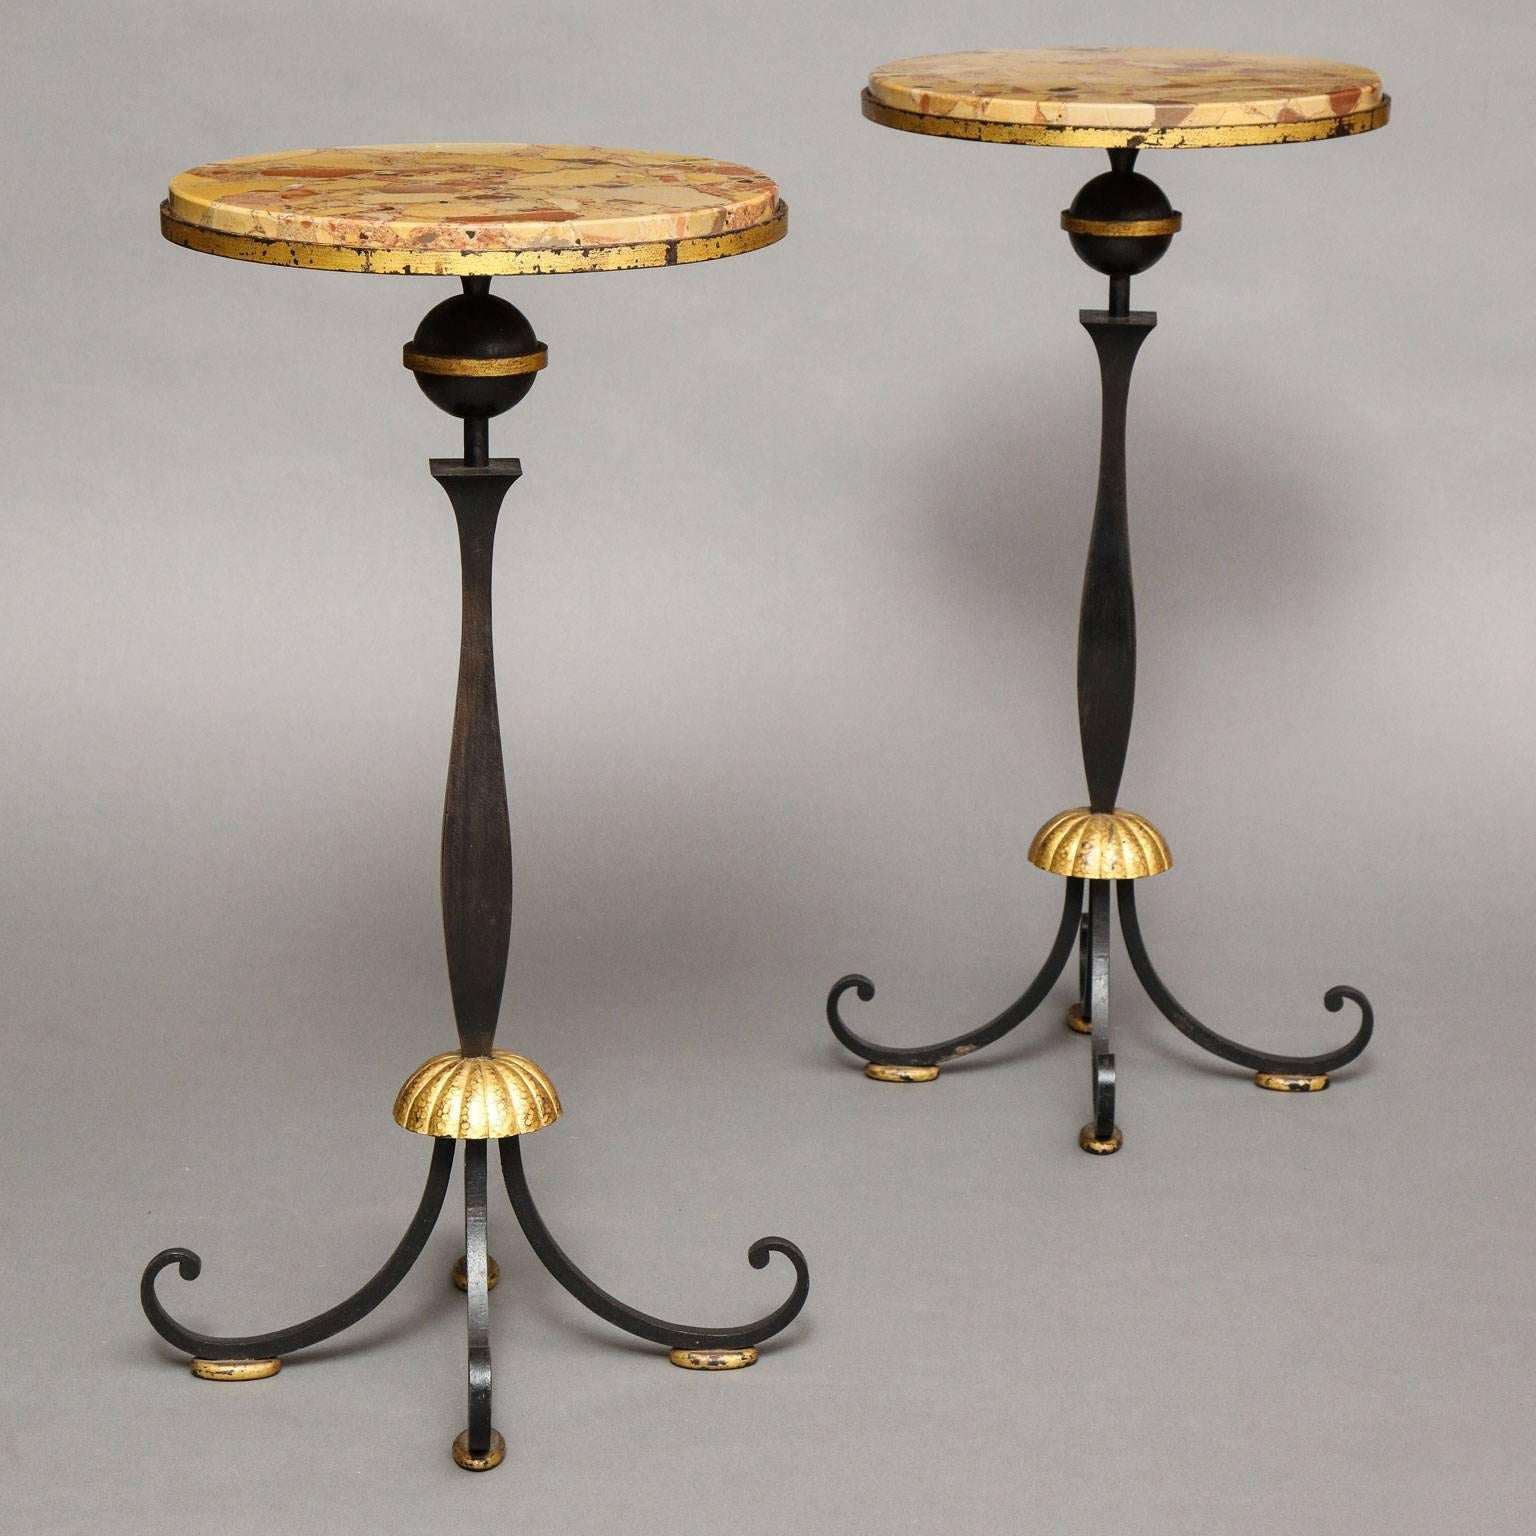 Gilbert Poillerat (1902-1988)
Pair of occasional tables in wrought iron and patinated gold leaf, with Breche d’Alep marble tops. Marble in shades of ochre, salmon, terracotta and mustard.
French, circa 1945

Documentation
François Baudot, Karl